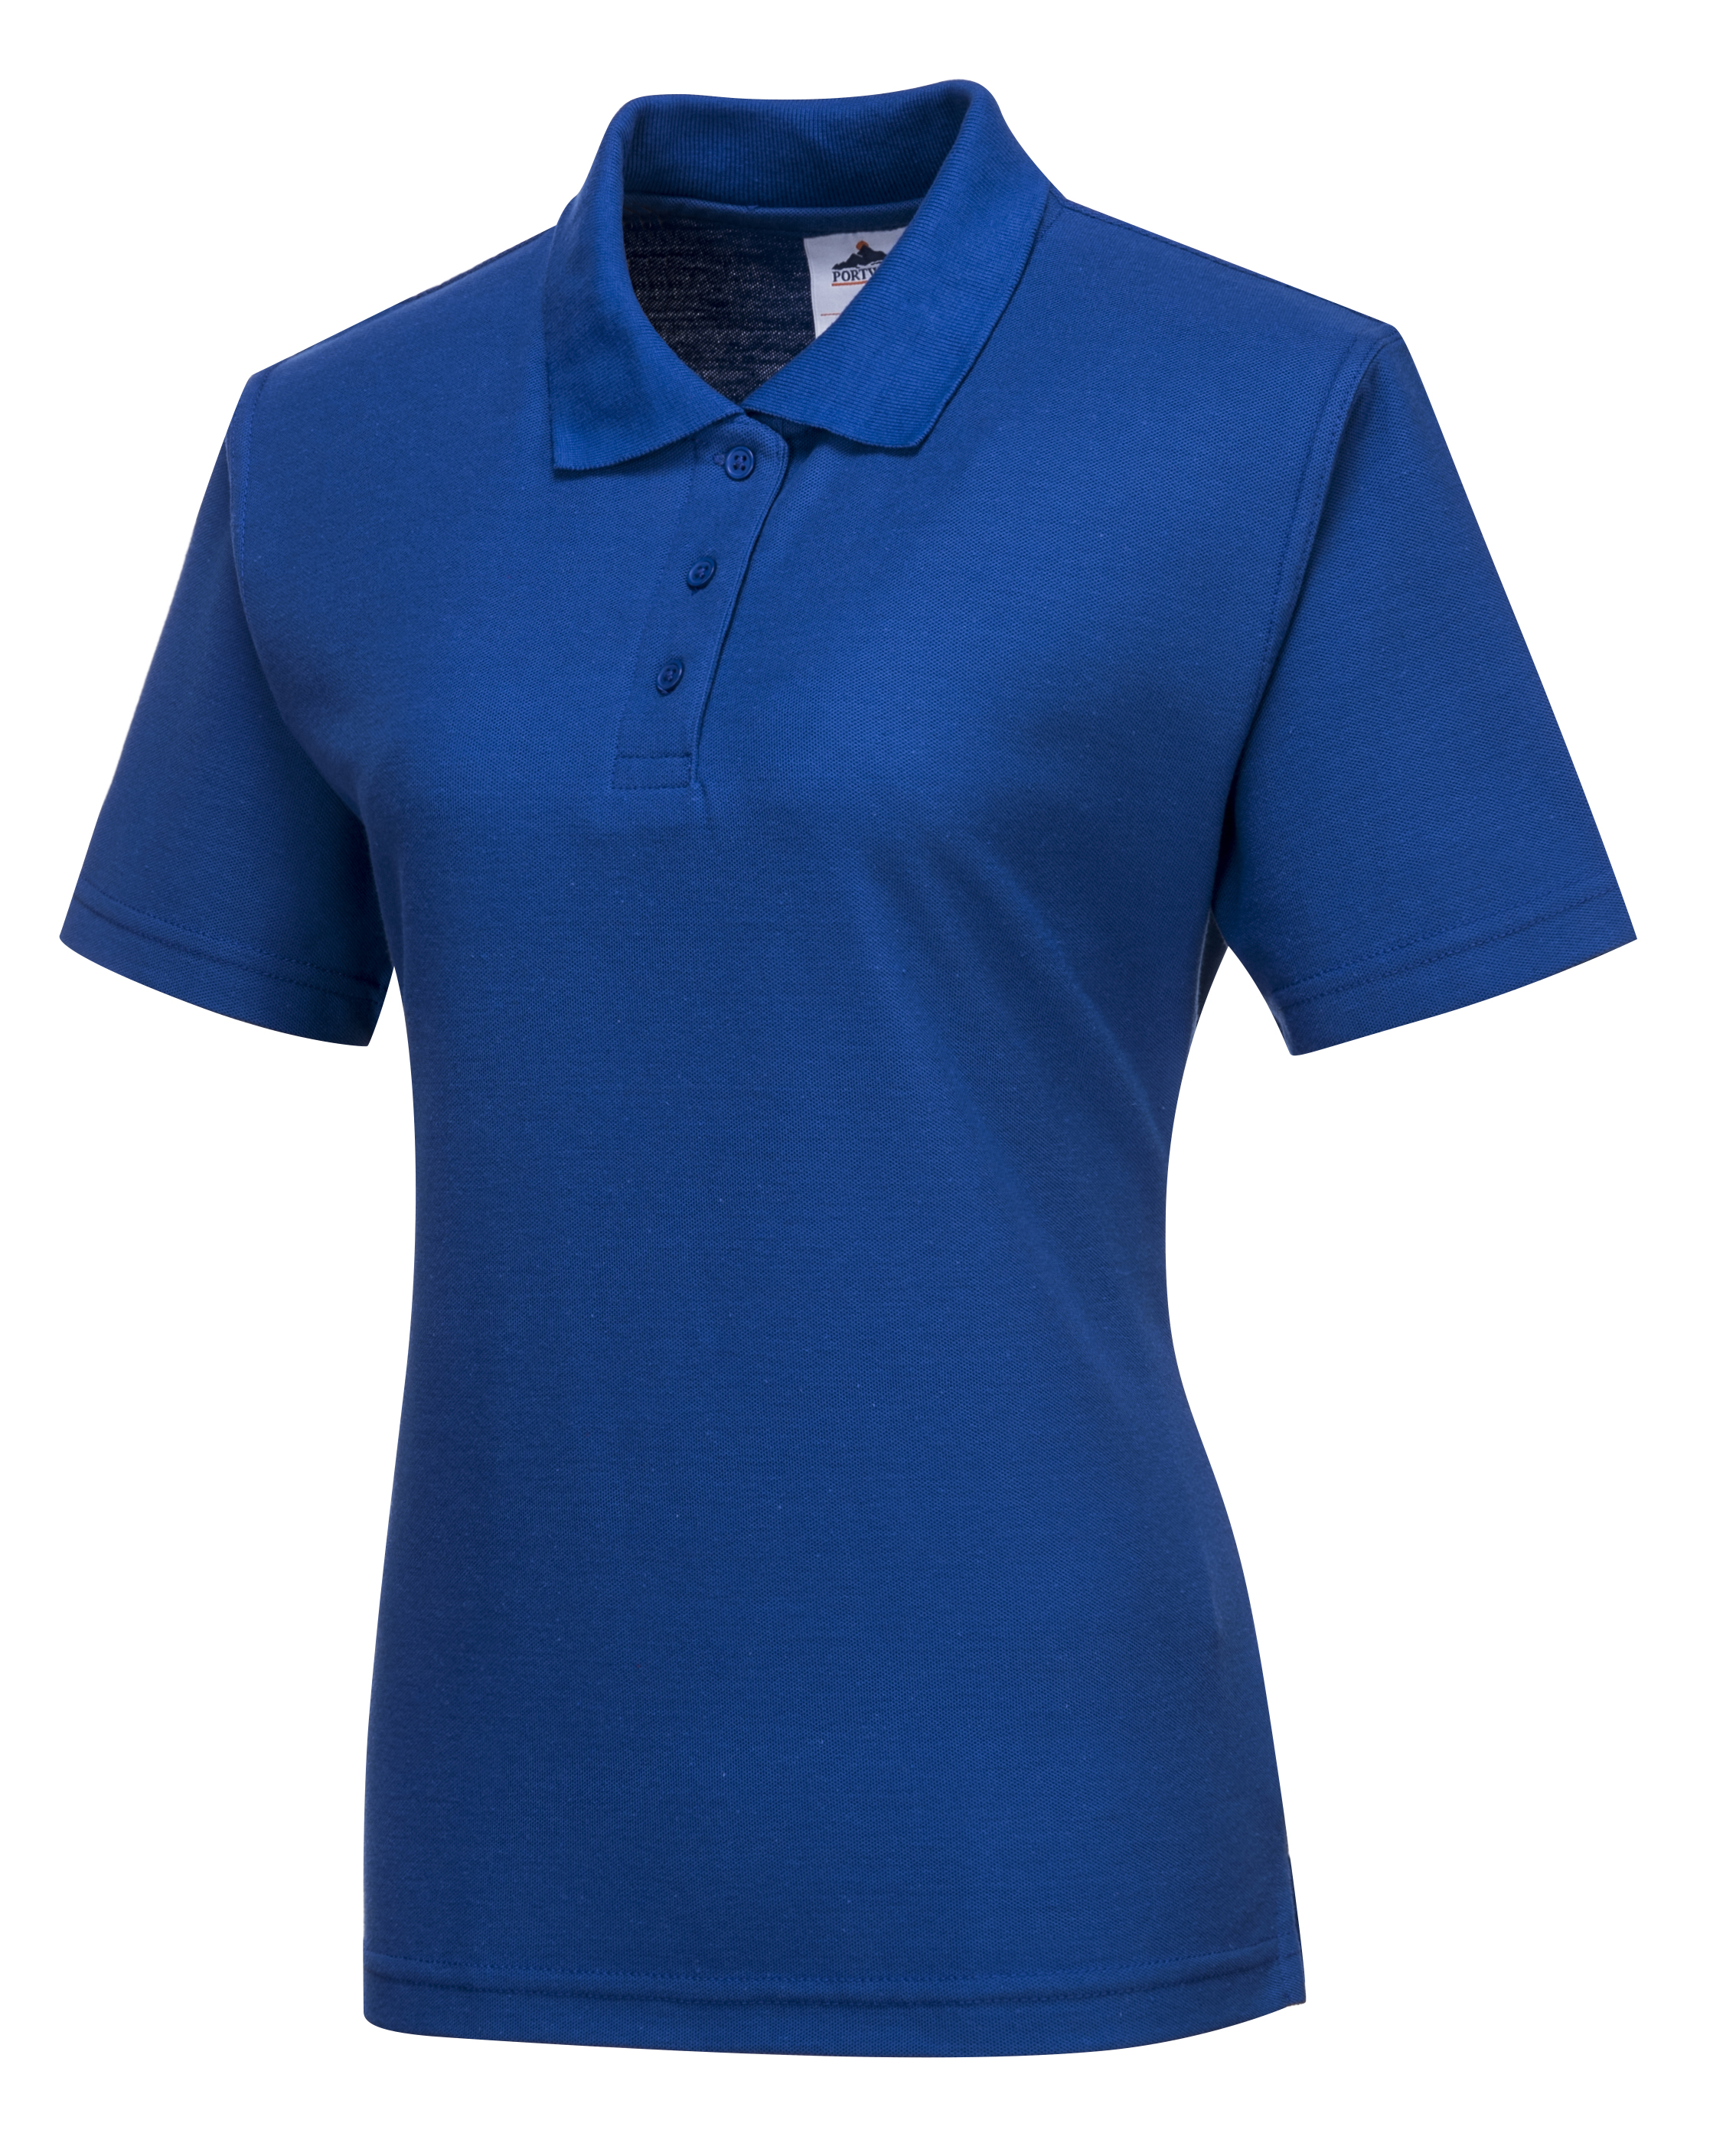 ax-httpss3.eu-west-2.amazonaws.comwebsystemstmp_for_downloadportwest-naples-ladies-polo-shirt-royal-blue.jpeg